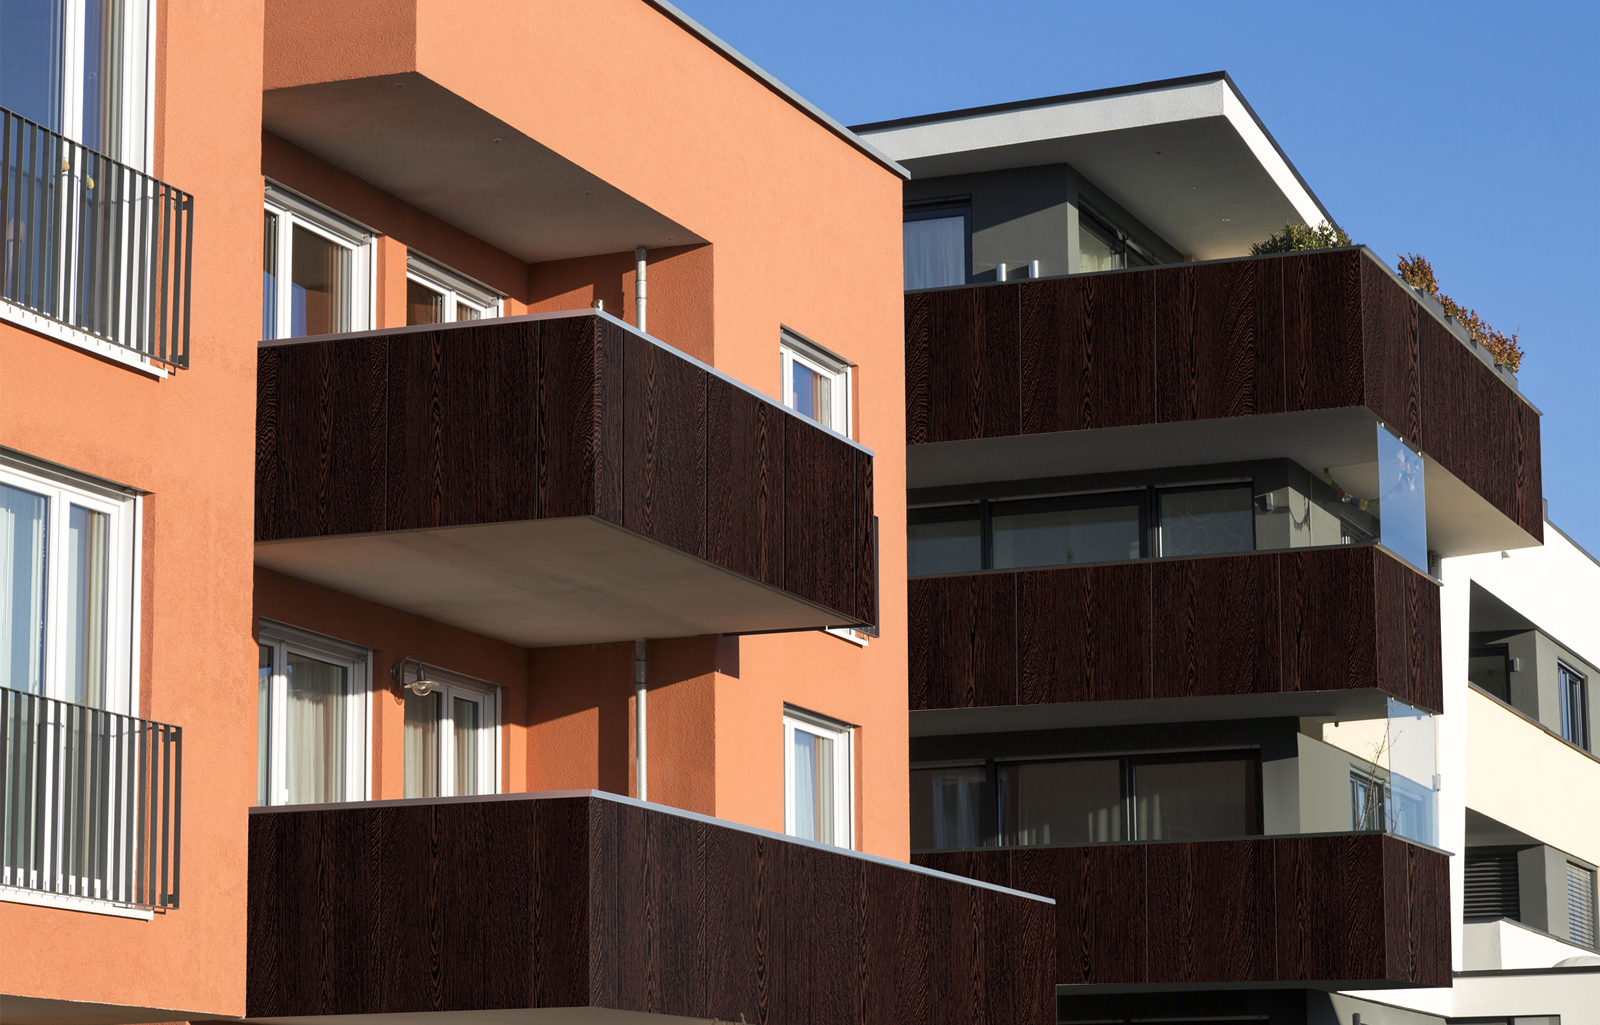 9102 Innate Wenge (SUD) exterior wall cladding in India